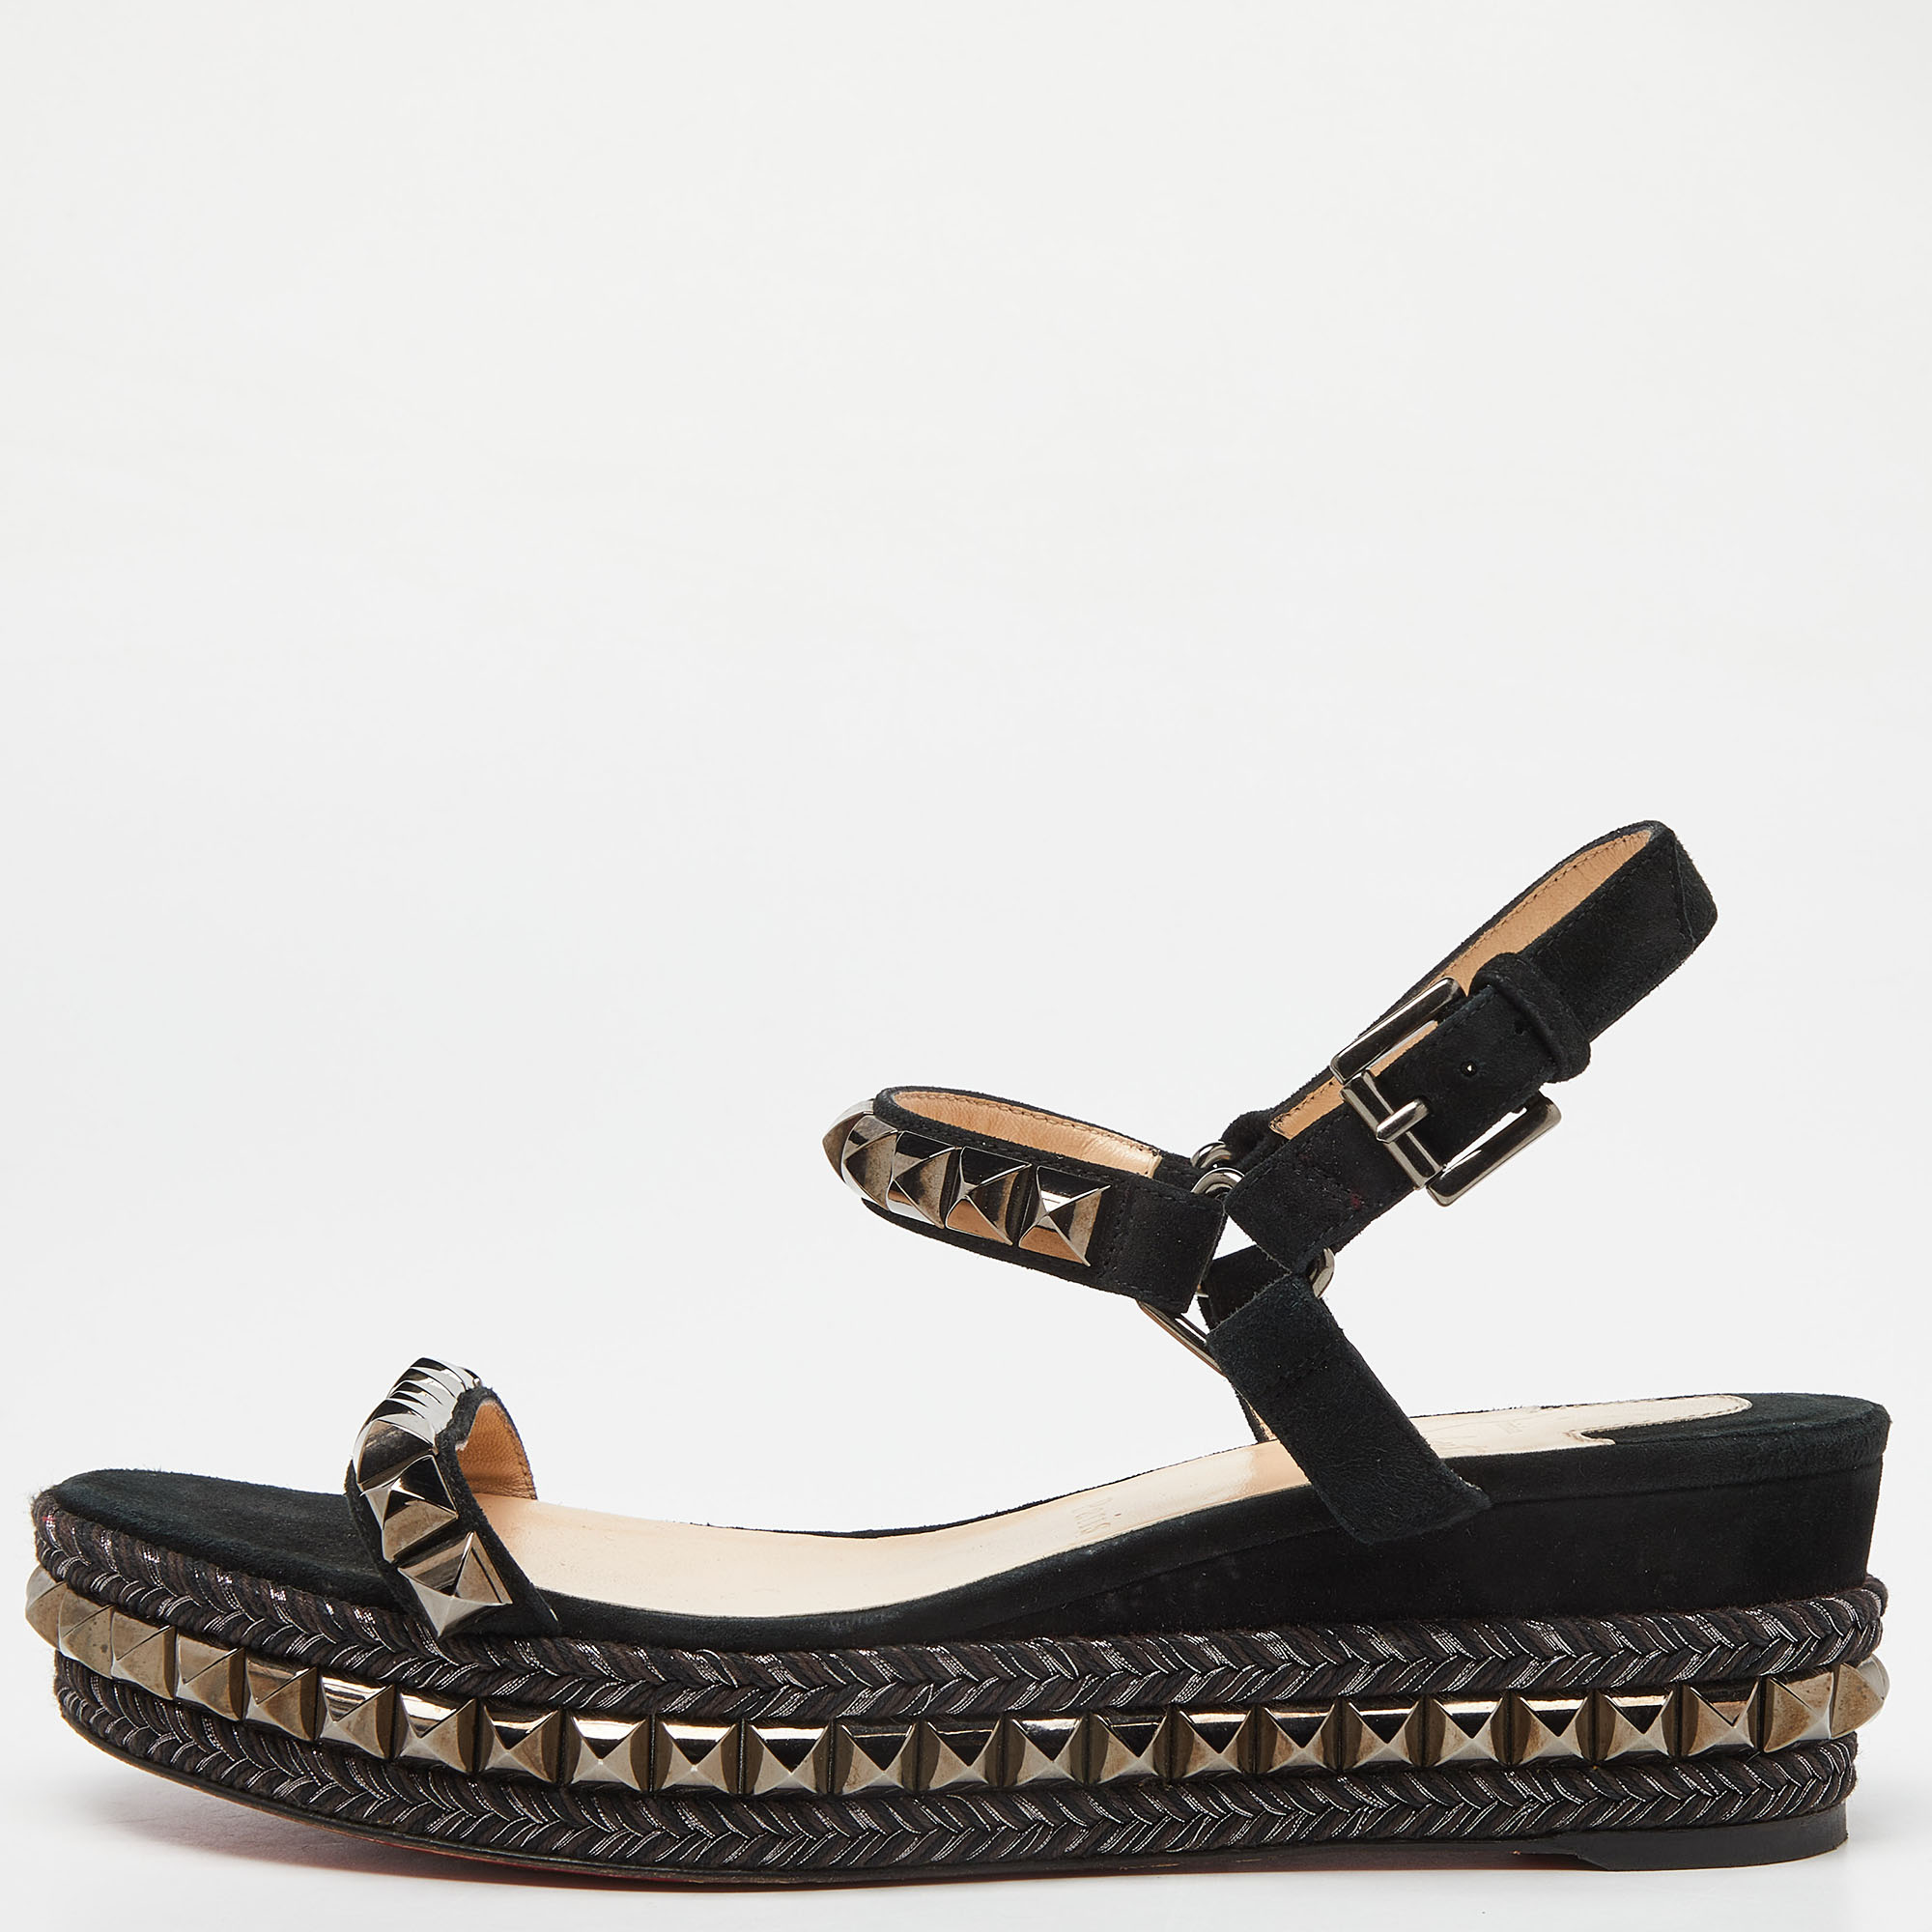 Christian louboutin black suede studded pyraclou sandals size 38